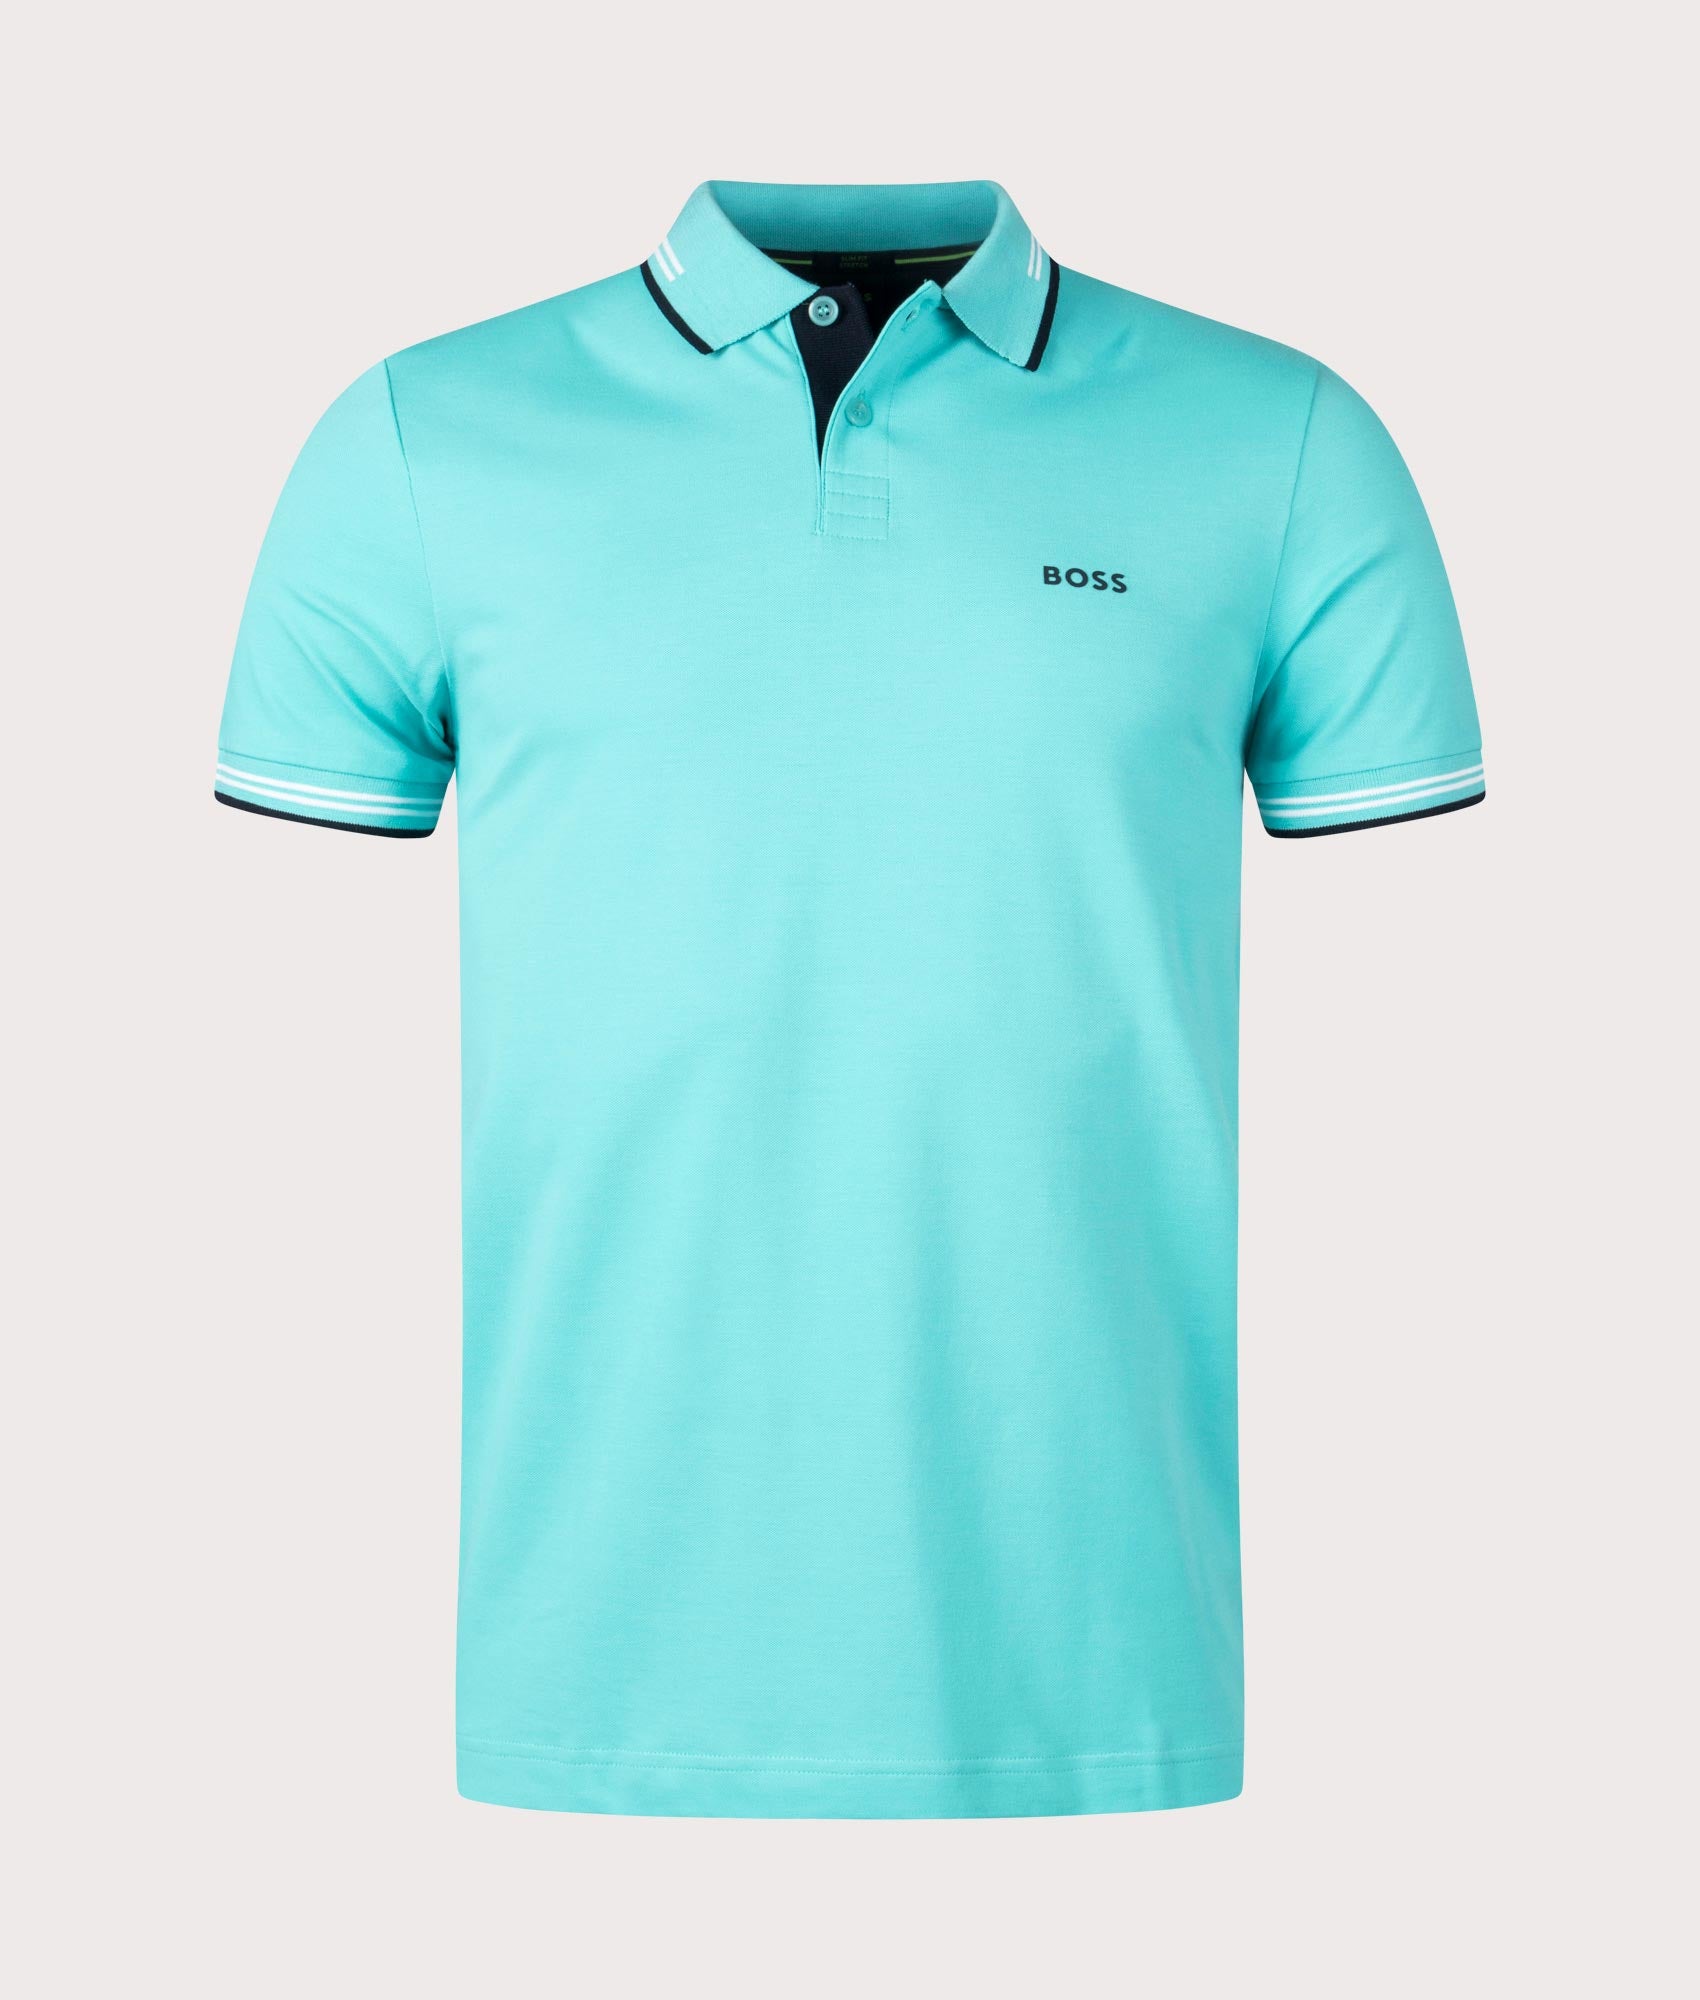 BOSS Mens Slim Fit Paul Polo Shirt - Colour: 367 Open Green - Size: Large